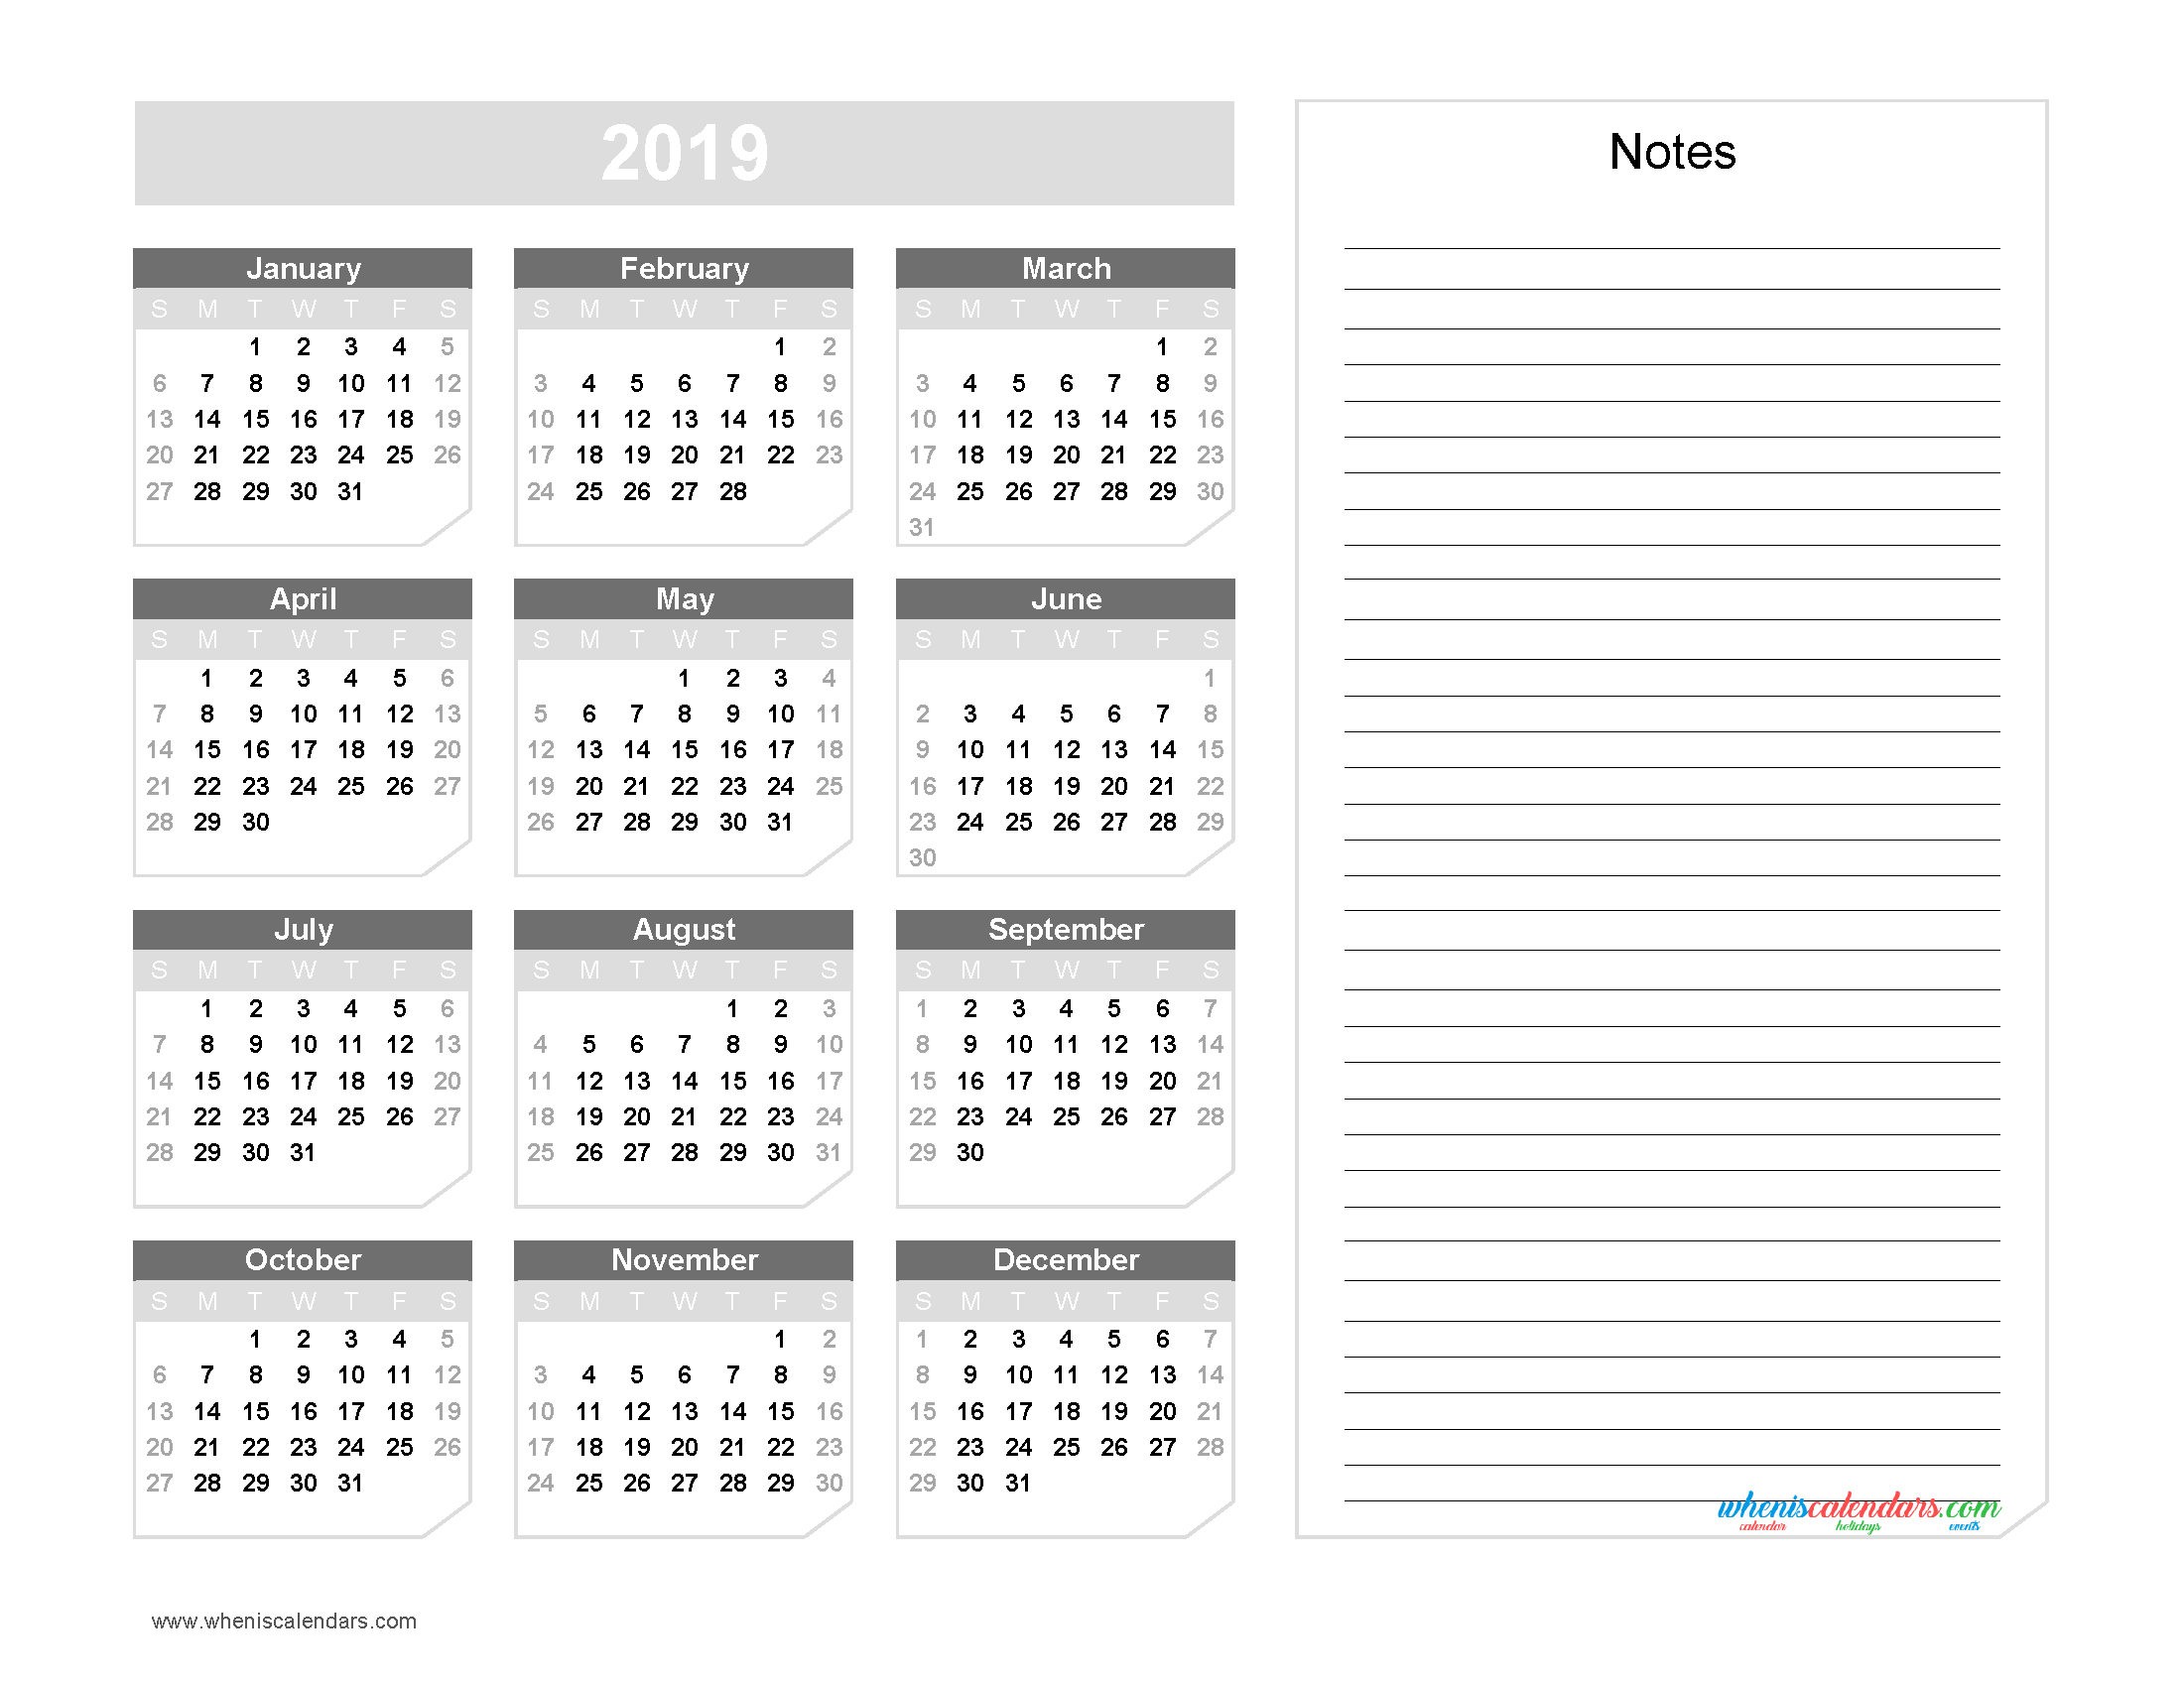 2019 Printable Calendar With Notes Yearly Calendar Printable Images